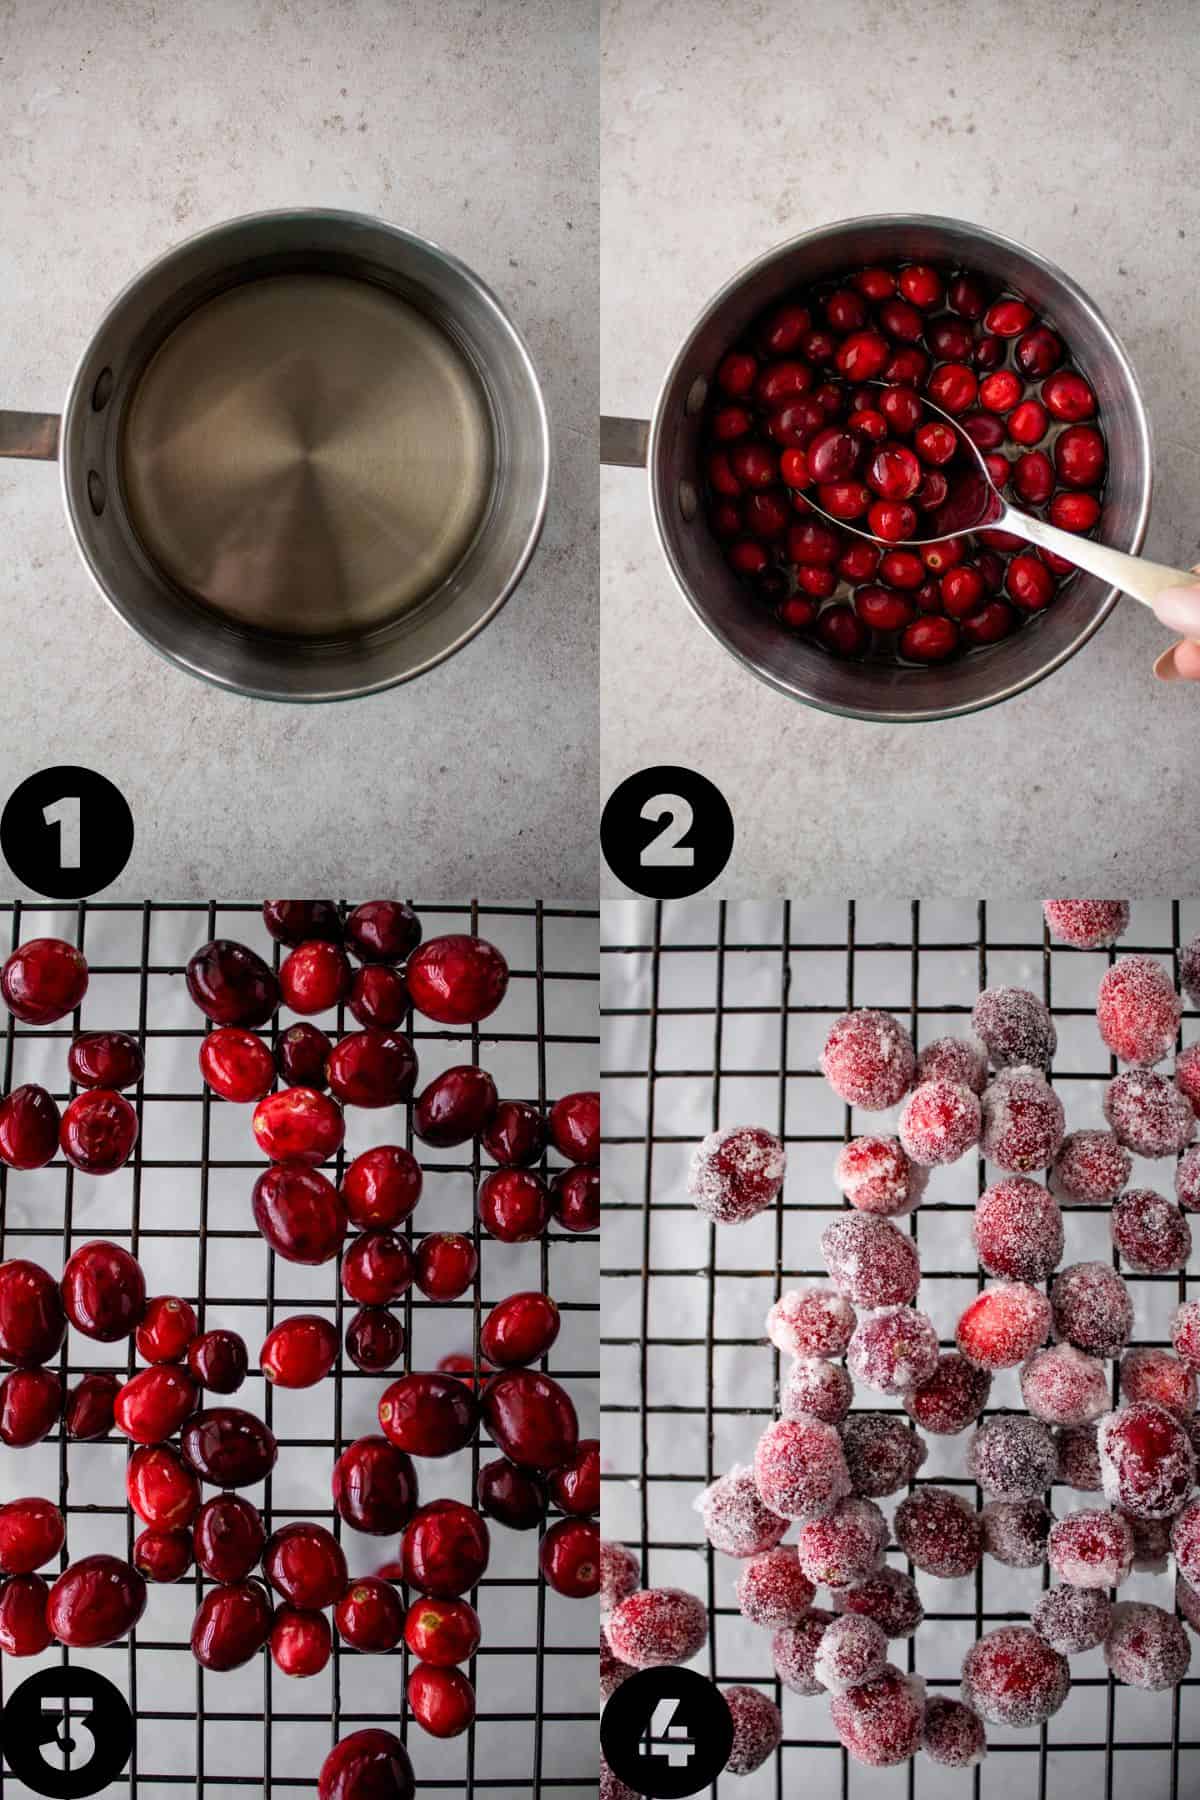 sugar syrup, coating cranberries, drying on drying rack, coated in sugar